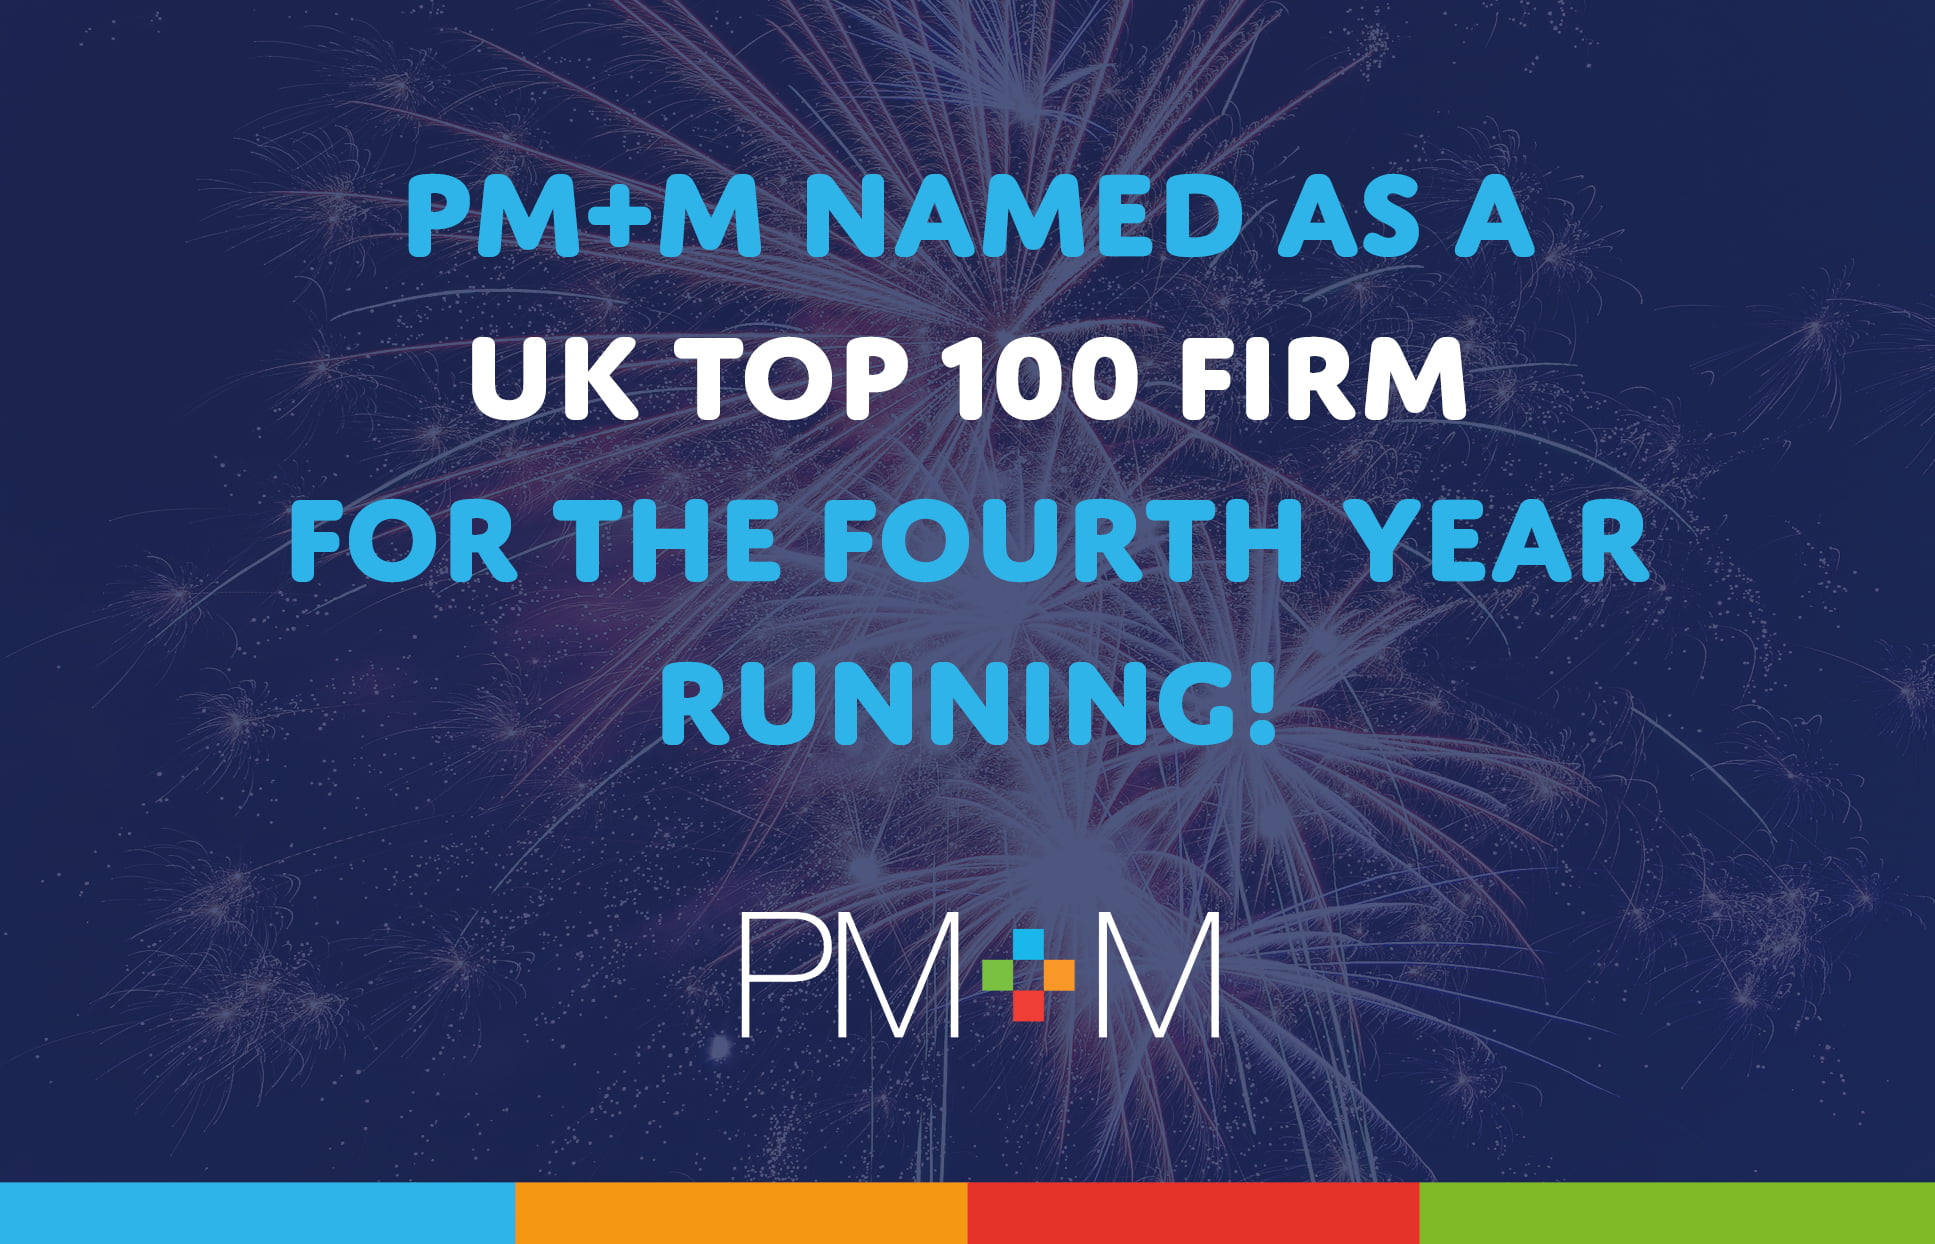 PM+M named as a UK top 100 firm for the FOURTH year running!